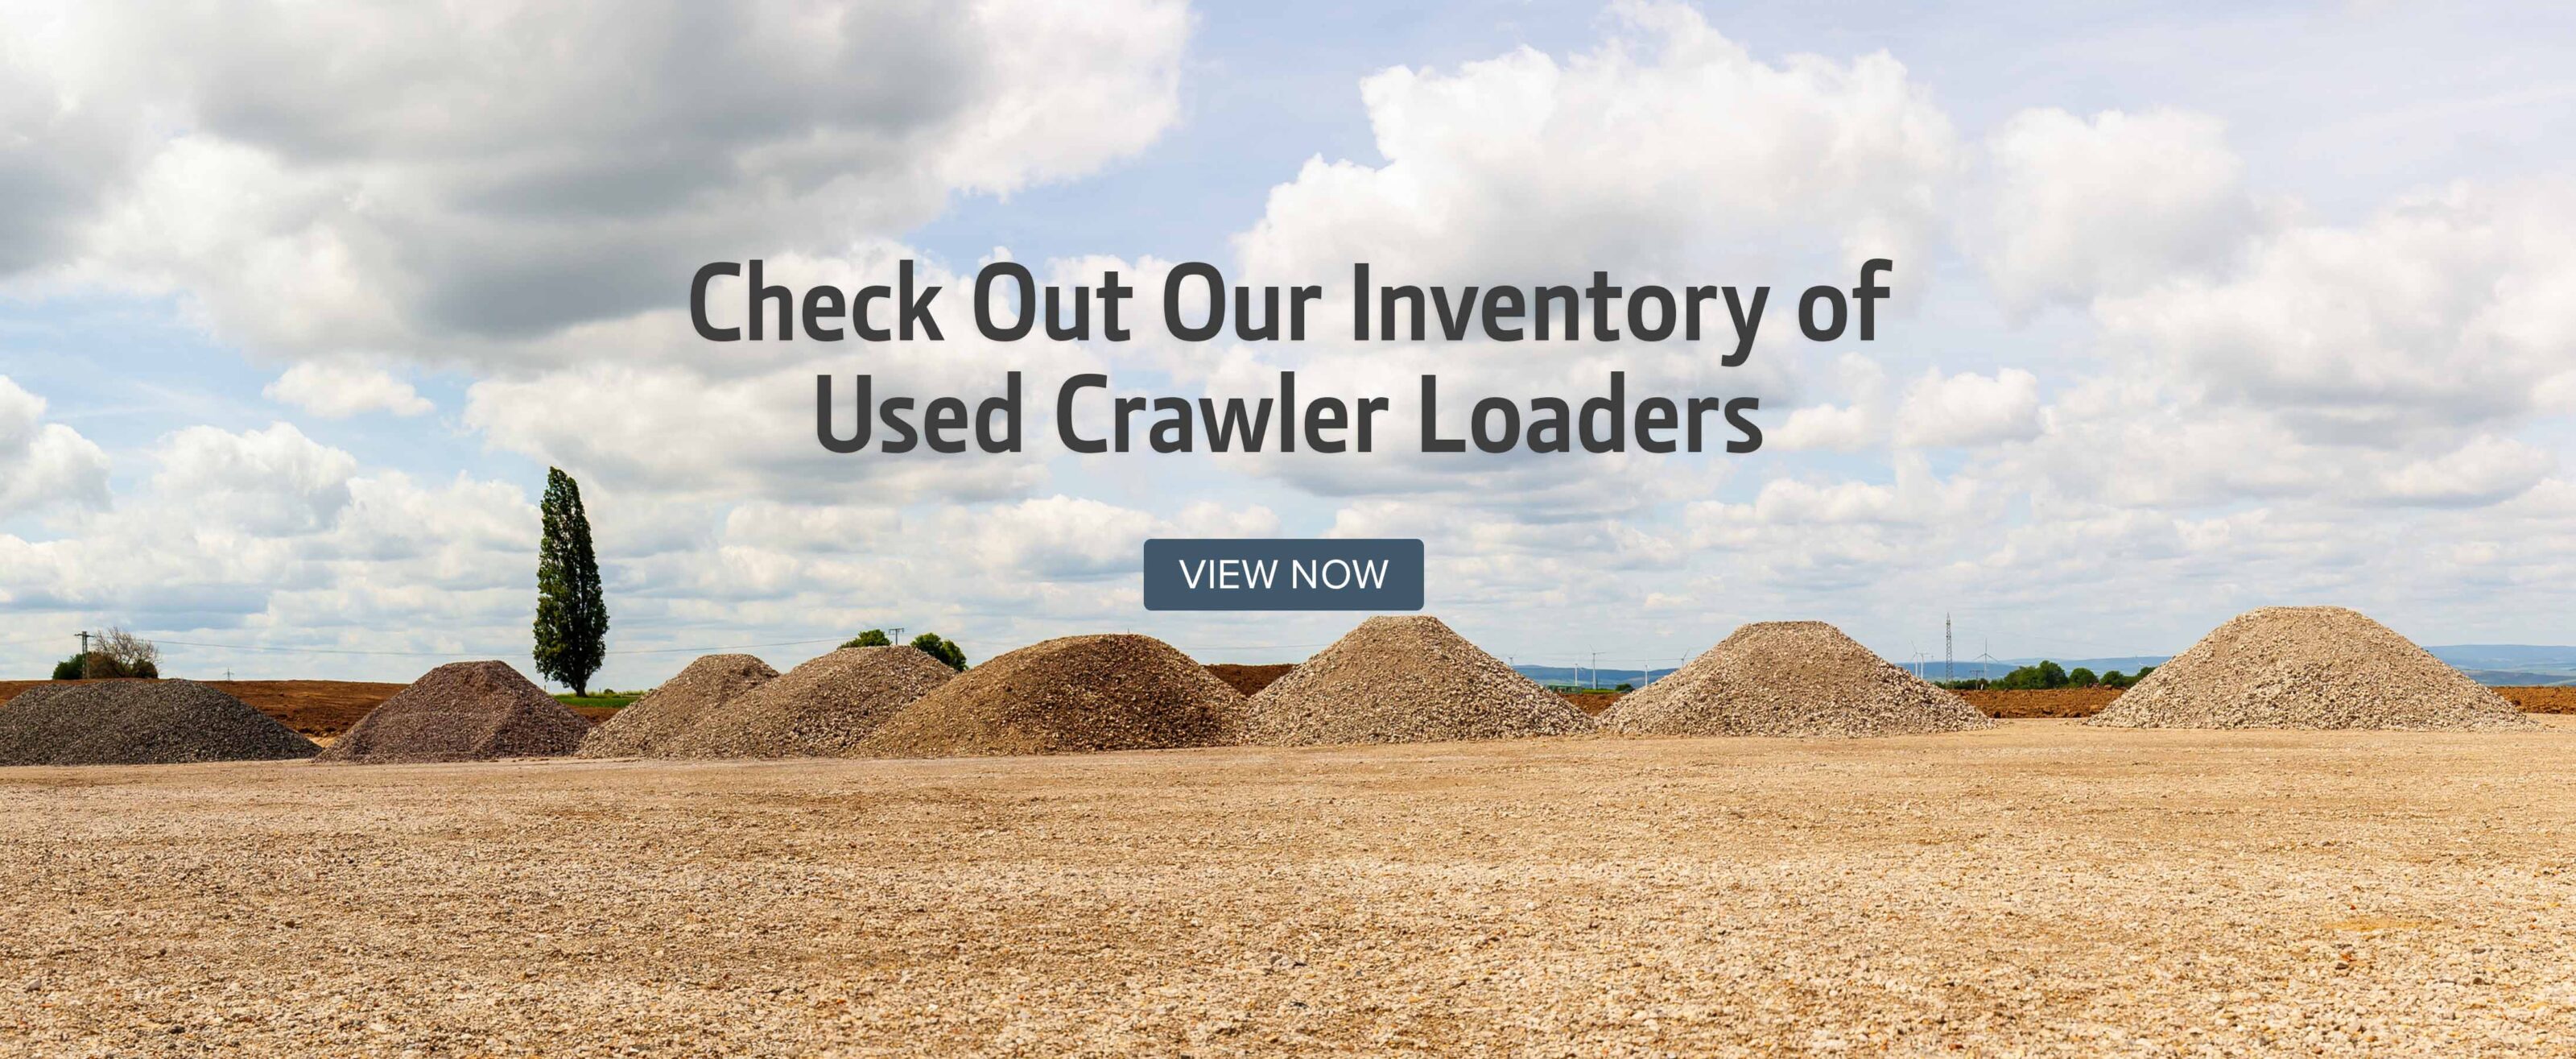 Check Out Our Inventory of Used Crawler Loaders